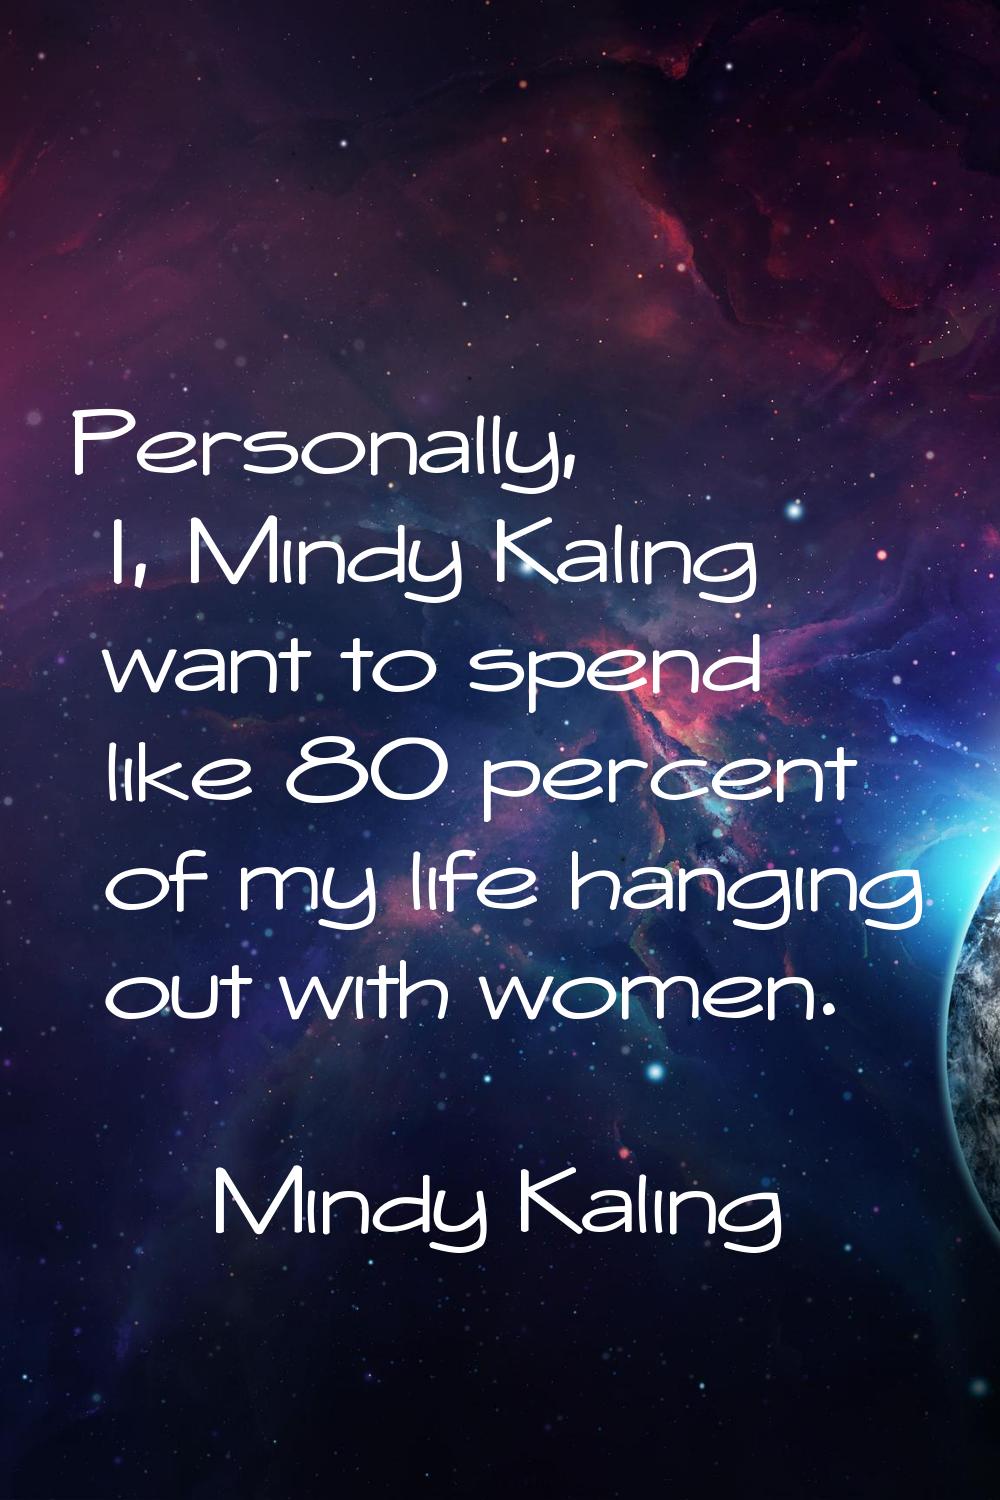 Personally, I, Mindy Kaling want to spend like 80 percent of my life hanging out with women.